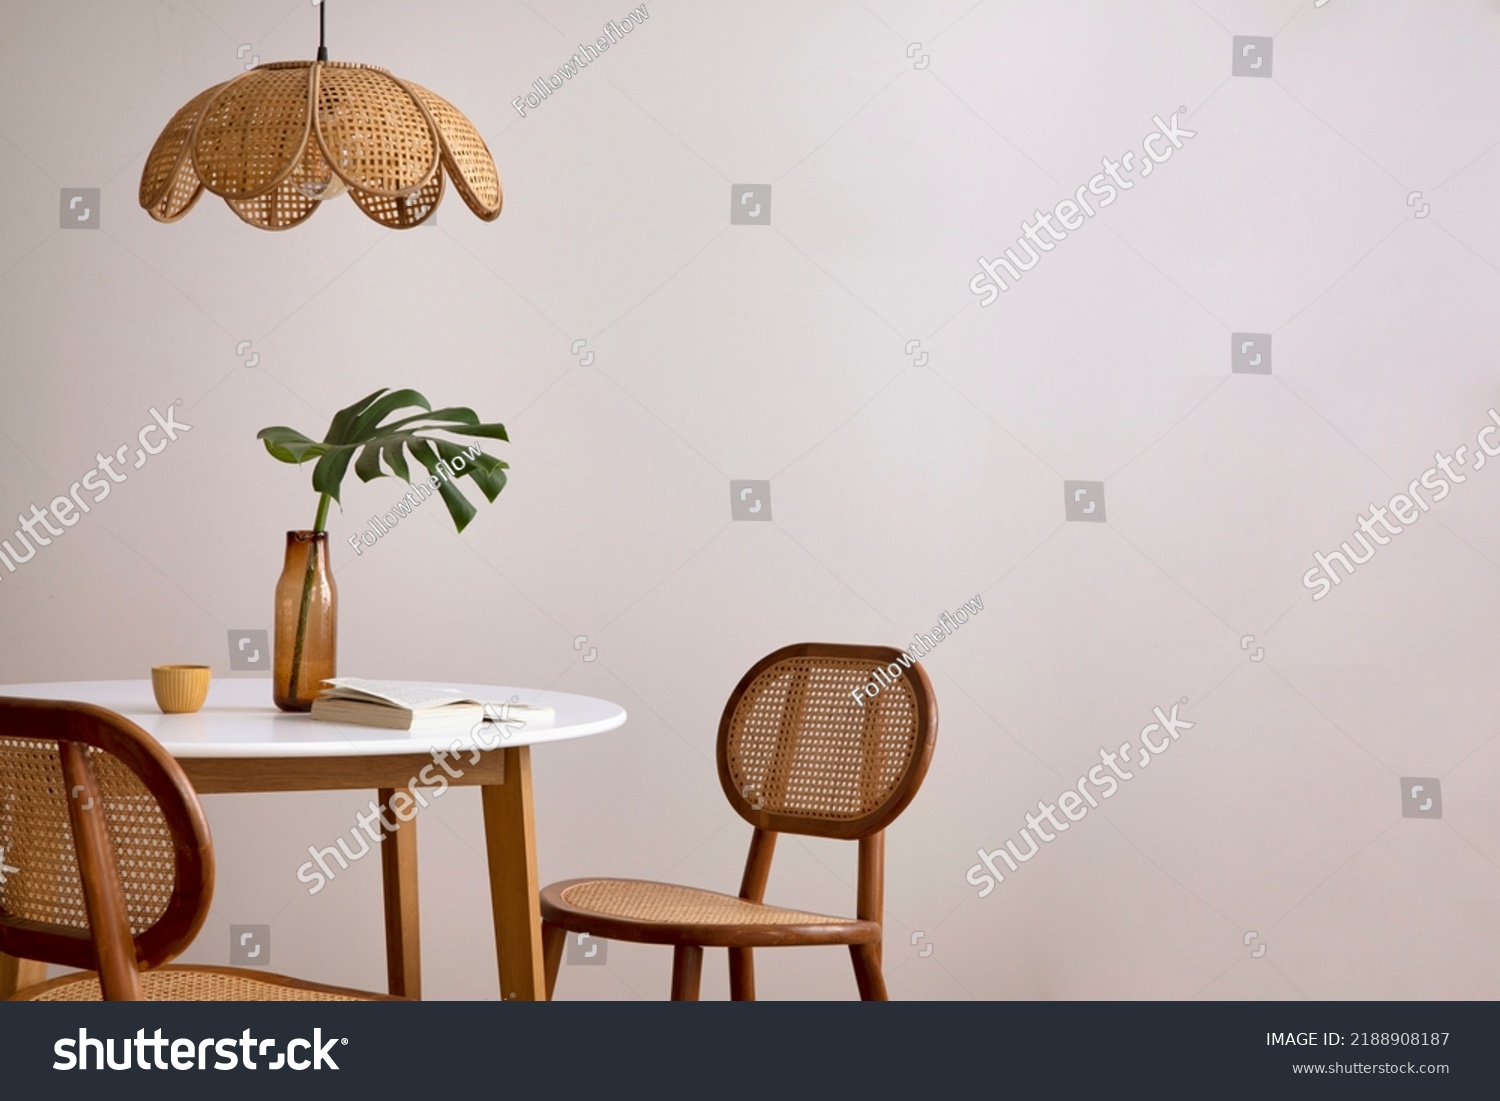 Minimalist composition of elegant kitchen space with round table, rattan chair, vase with leaf, pedant lamp and personal accessories. Minimalist home decor. Beige wall. Template.  #2188908187